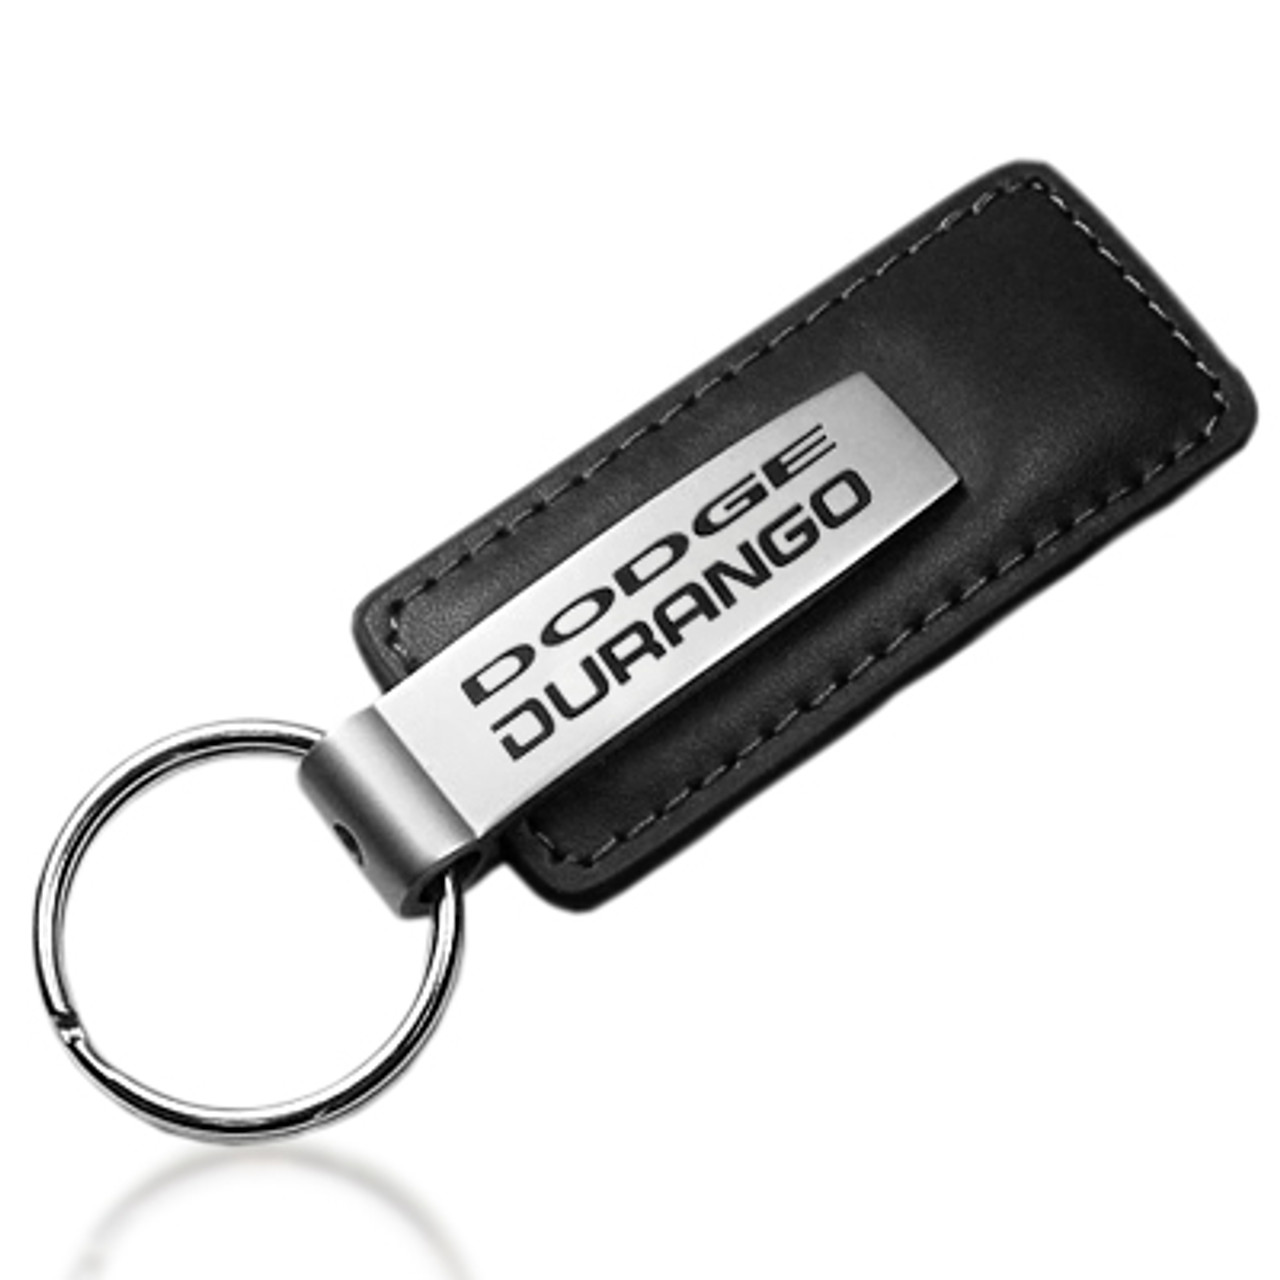 Zinc Alloy and Leather Car Logo Key Ring Key Chain for GMC 